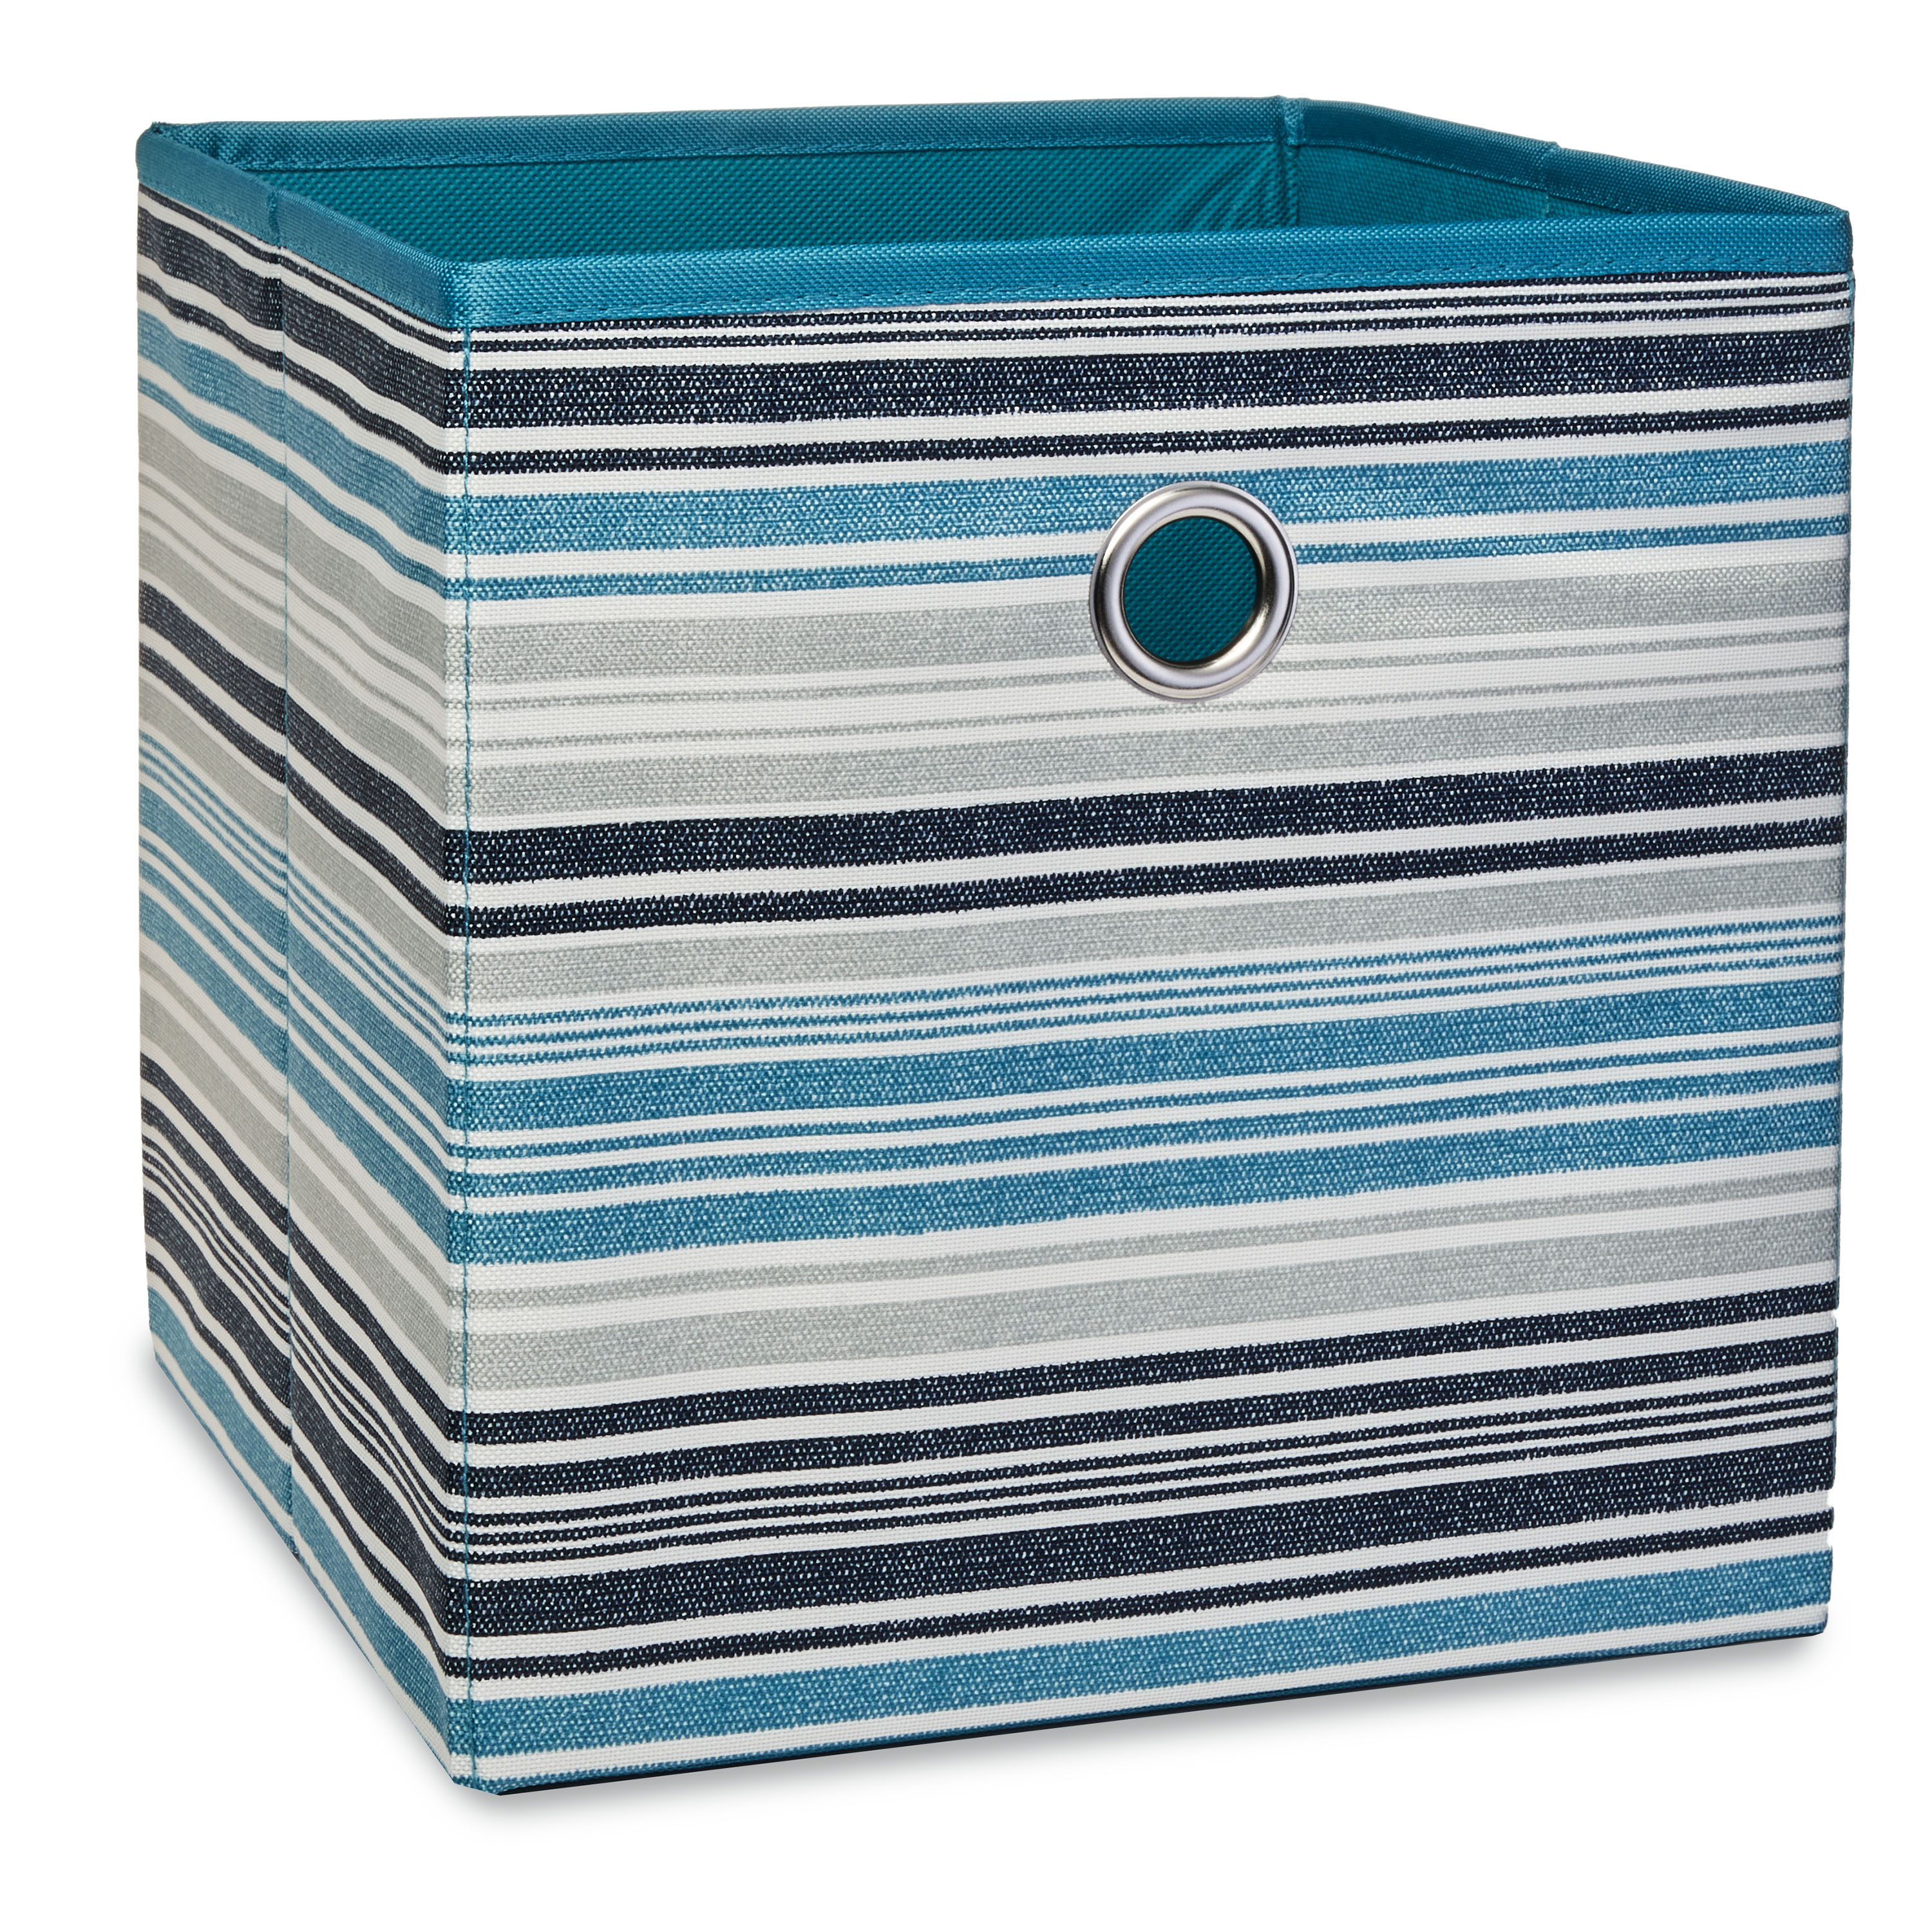 Mainstays Collapsible Fabric Cube Storage Bins (10.5" x 10.5"), Striped Cool Water, 4 Pack - image 1 of 5